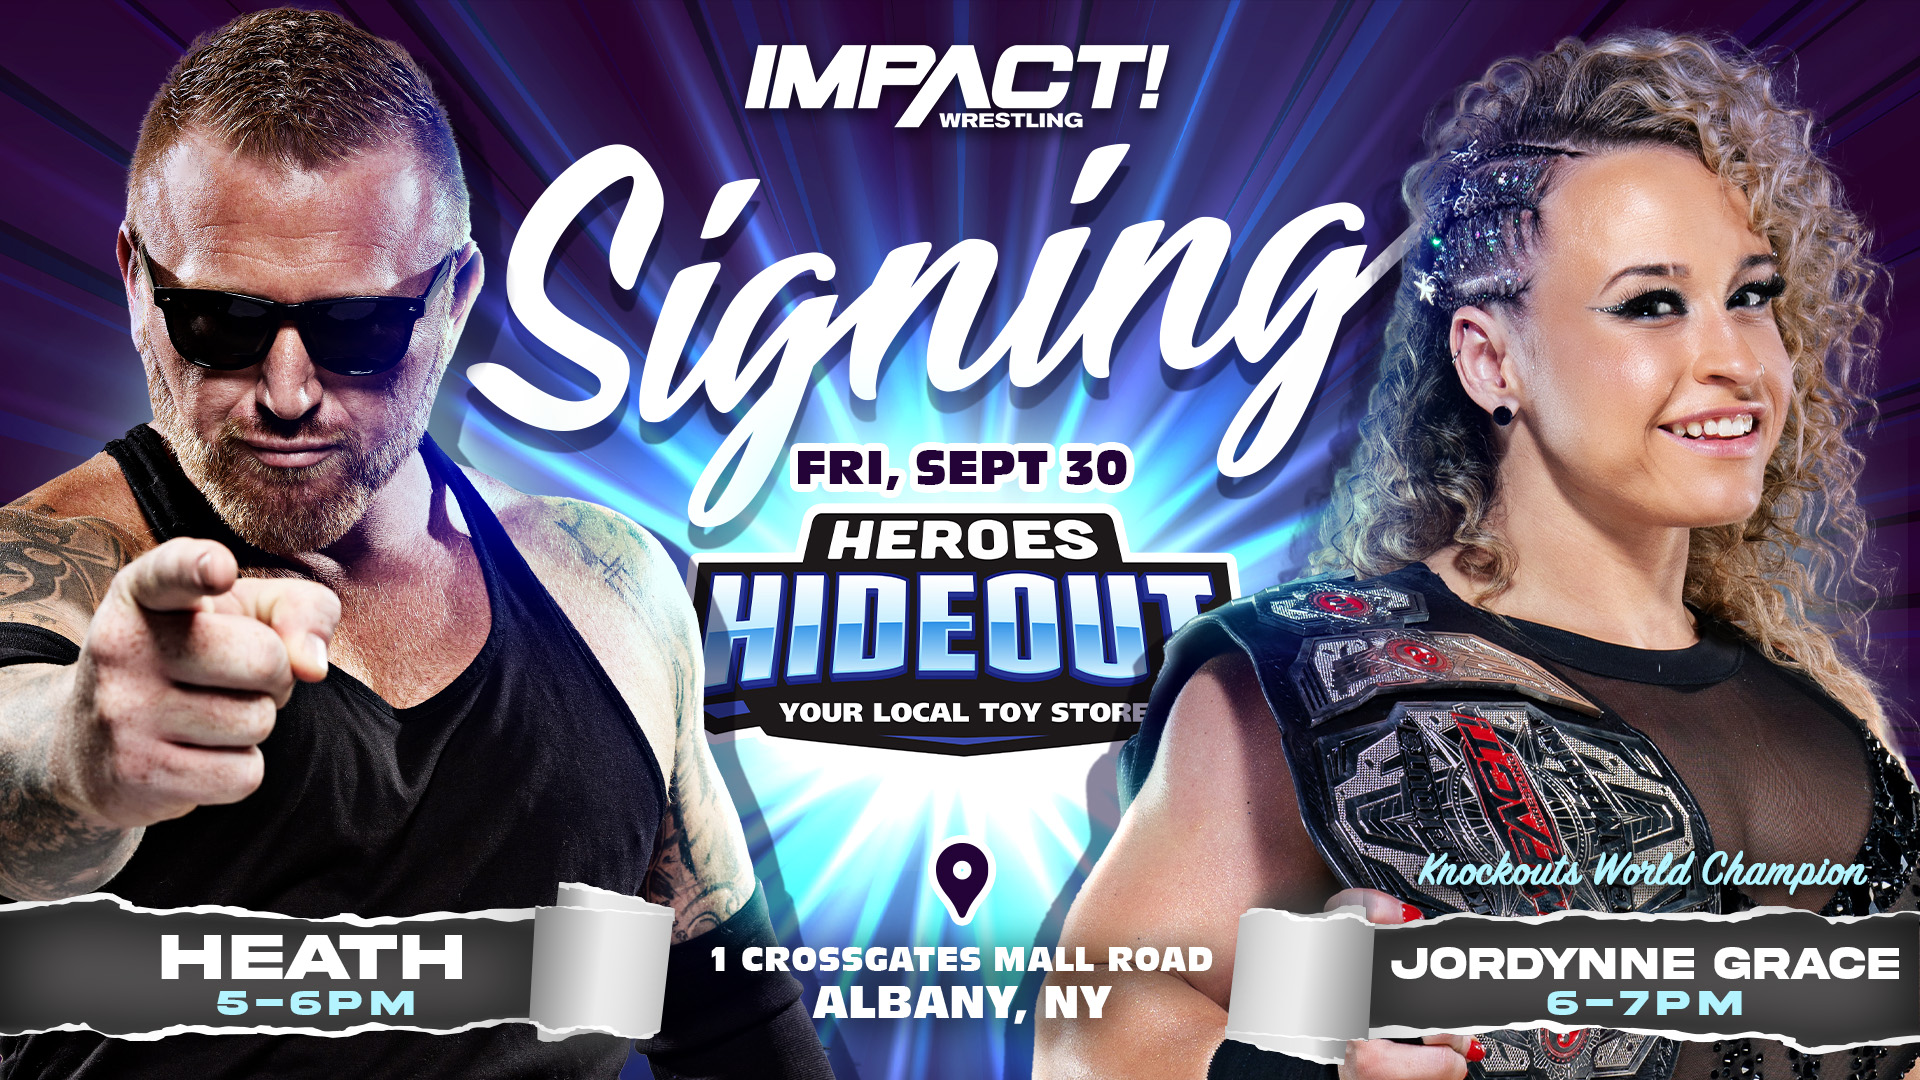 Heath & Jordynne Grace Set for Autograph Signing This Friday at Heroes Hideout in Crossgates, NY